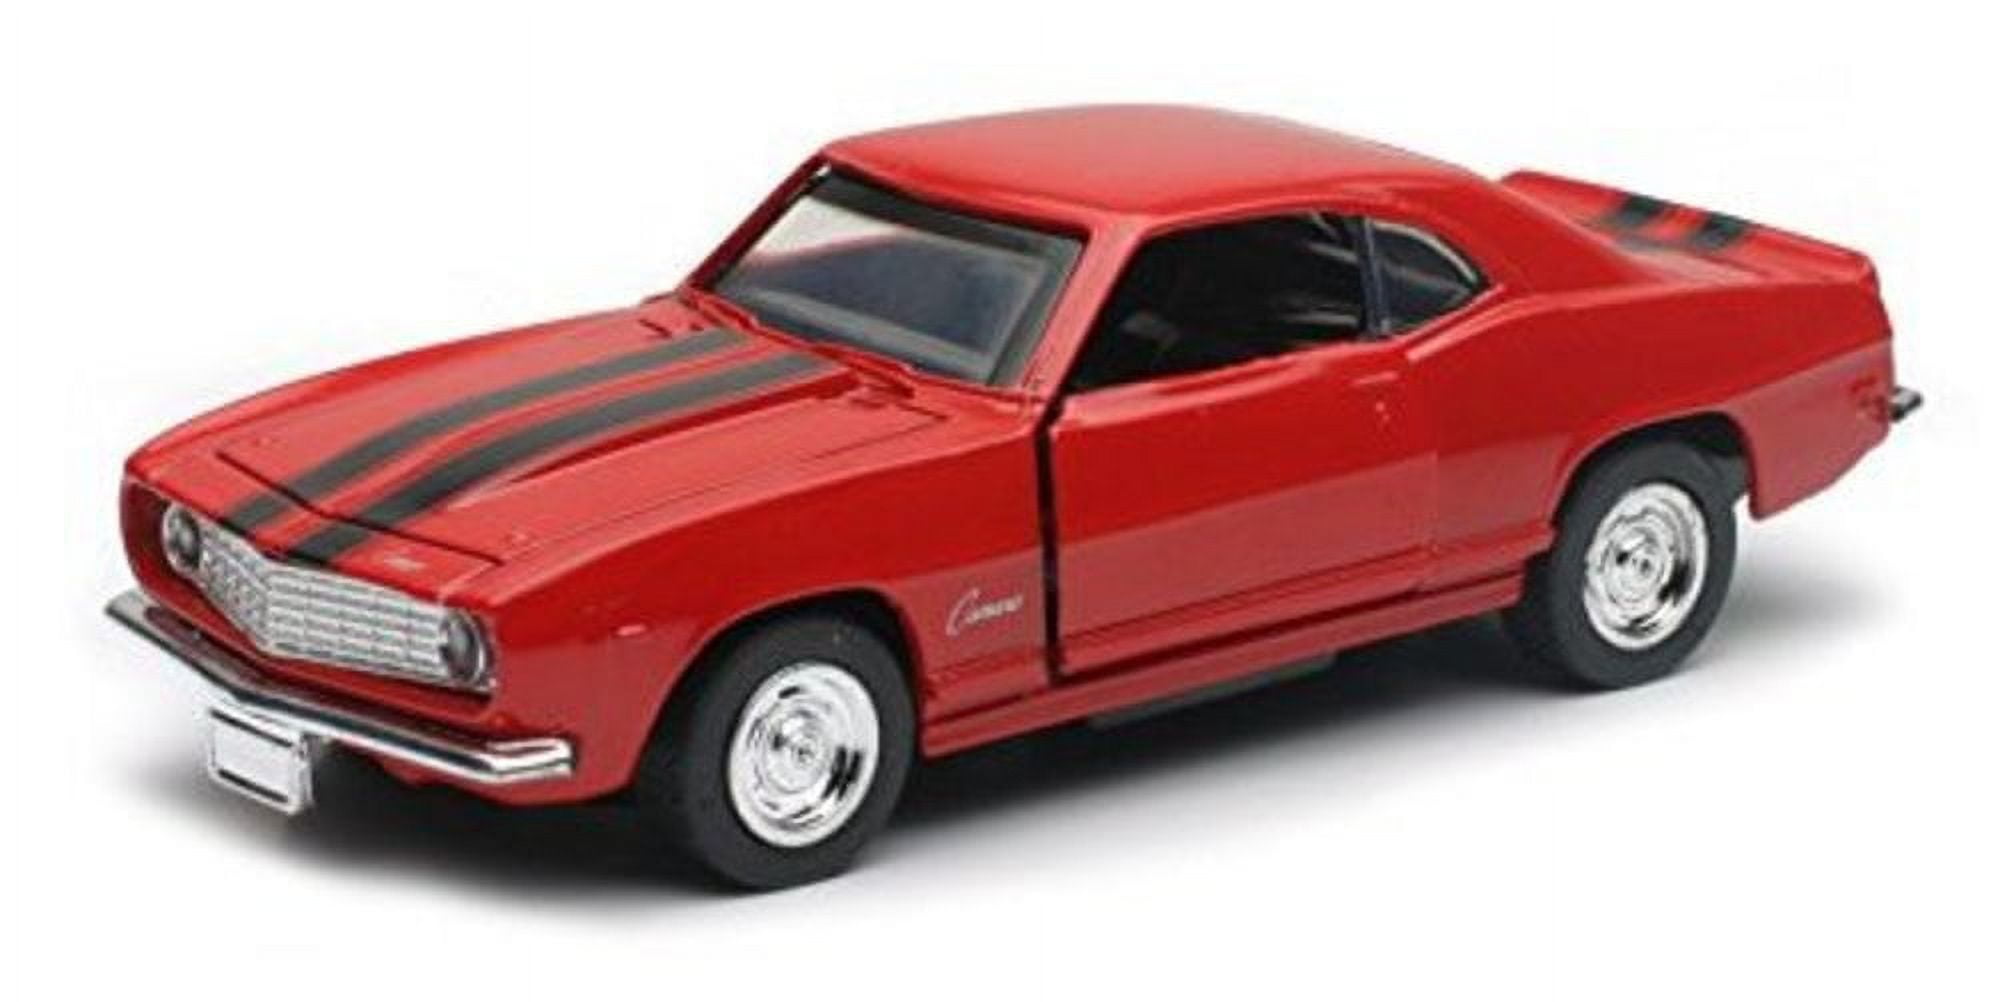 New-ray 50473b 1969 Chevrolet Camaro Z28 In Red With Black Stripes Pack Of 12